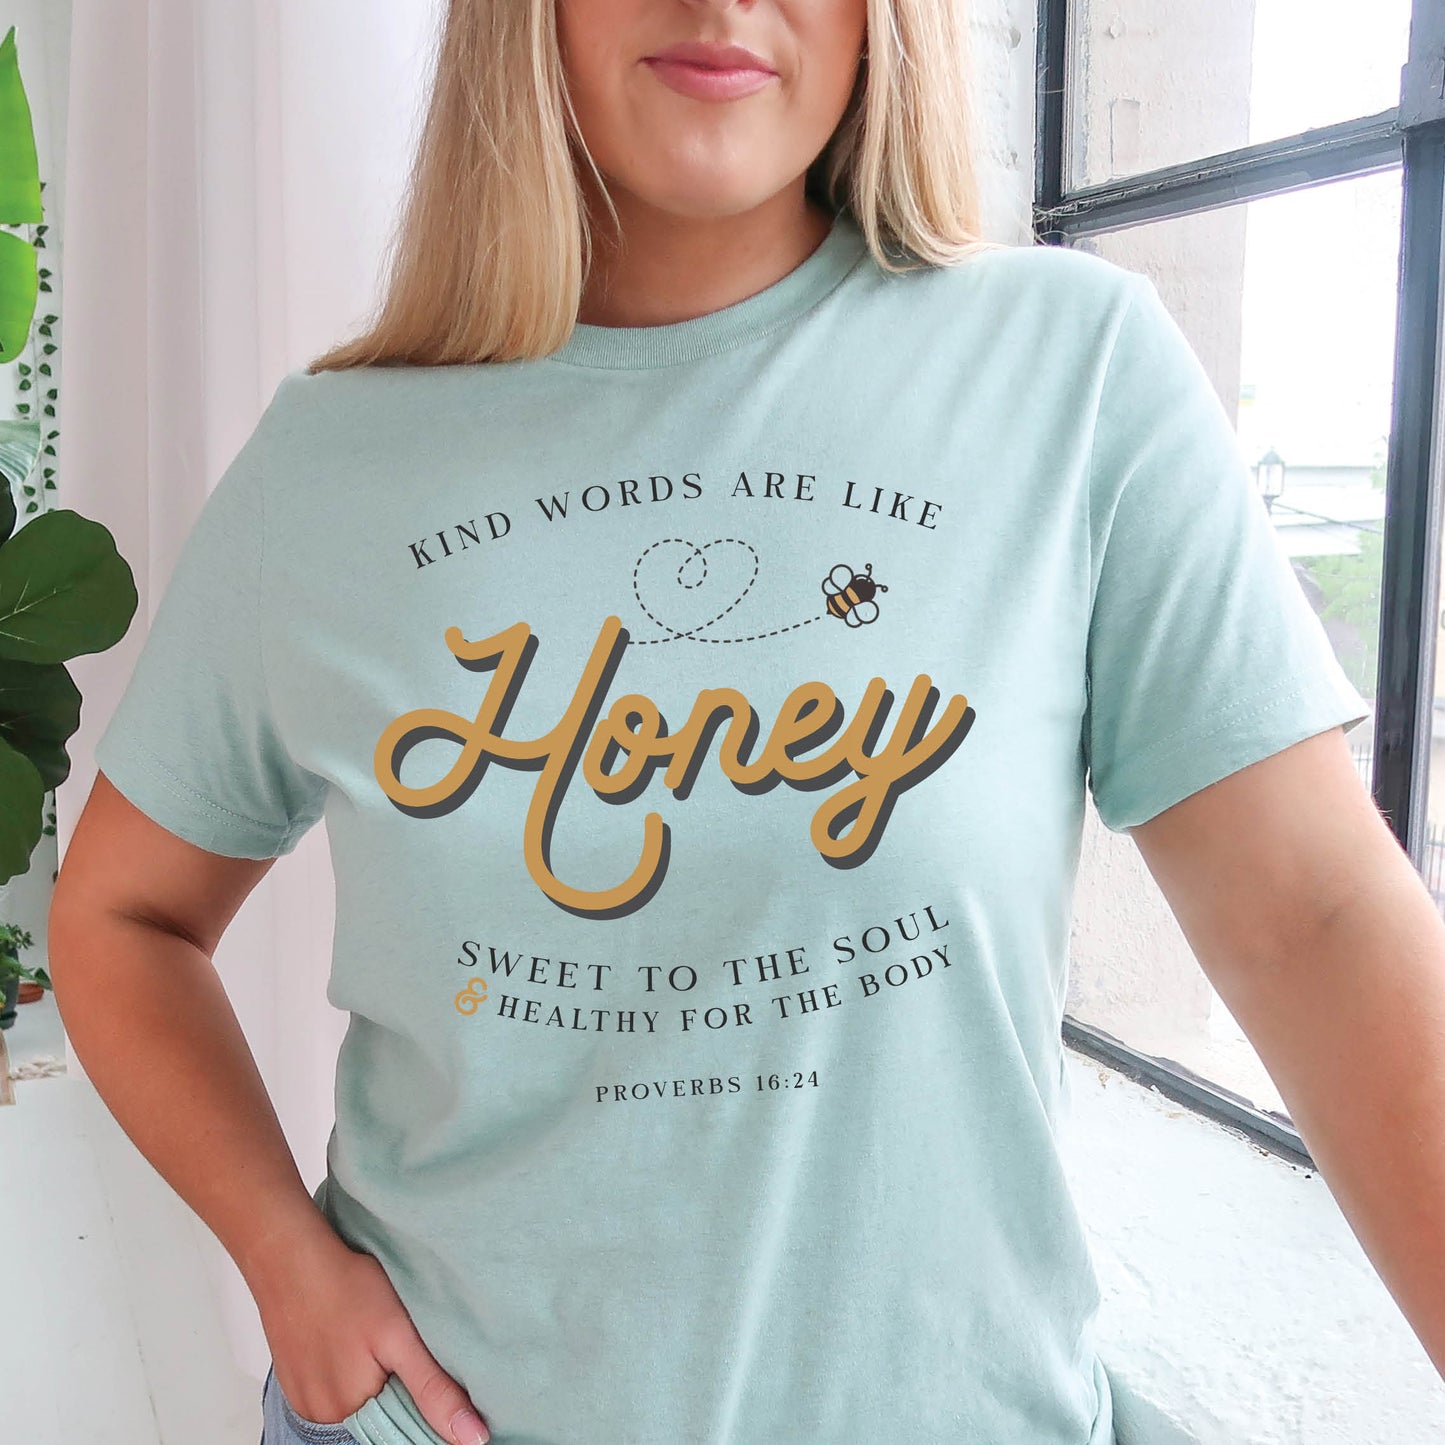 Dusty heather blue & gold Christian aesthetic unisex faith-based kindness bee t-shirt for women with Proverbs 16:24 bible verse quote that says, "Kind Words Are Like Honey, Sweet To the Soul, and Healthy For the Body" 